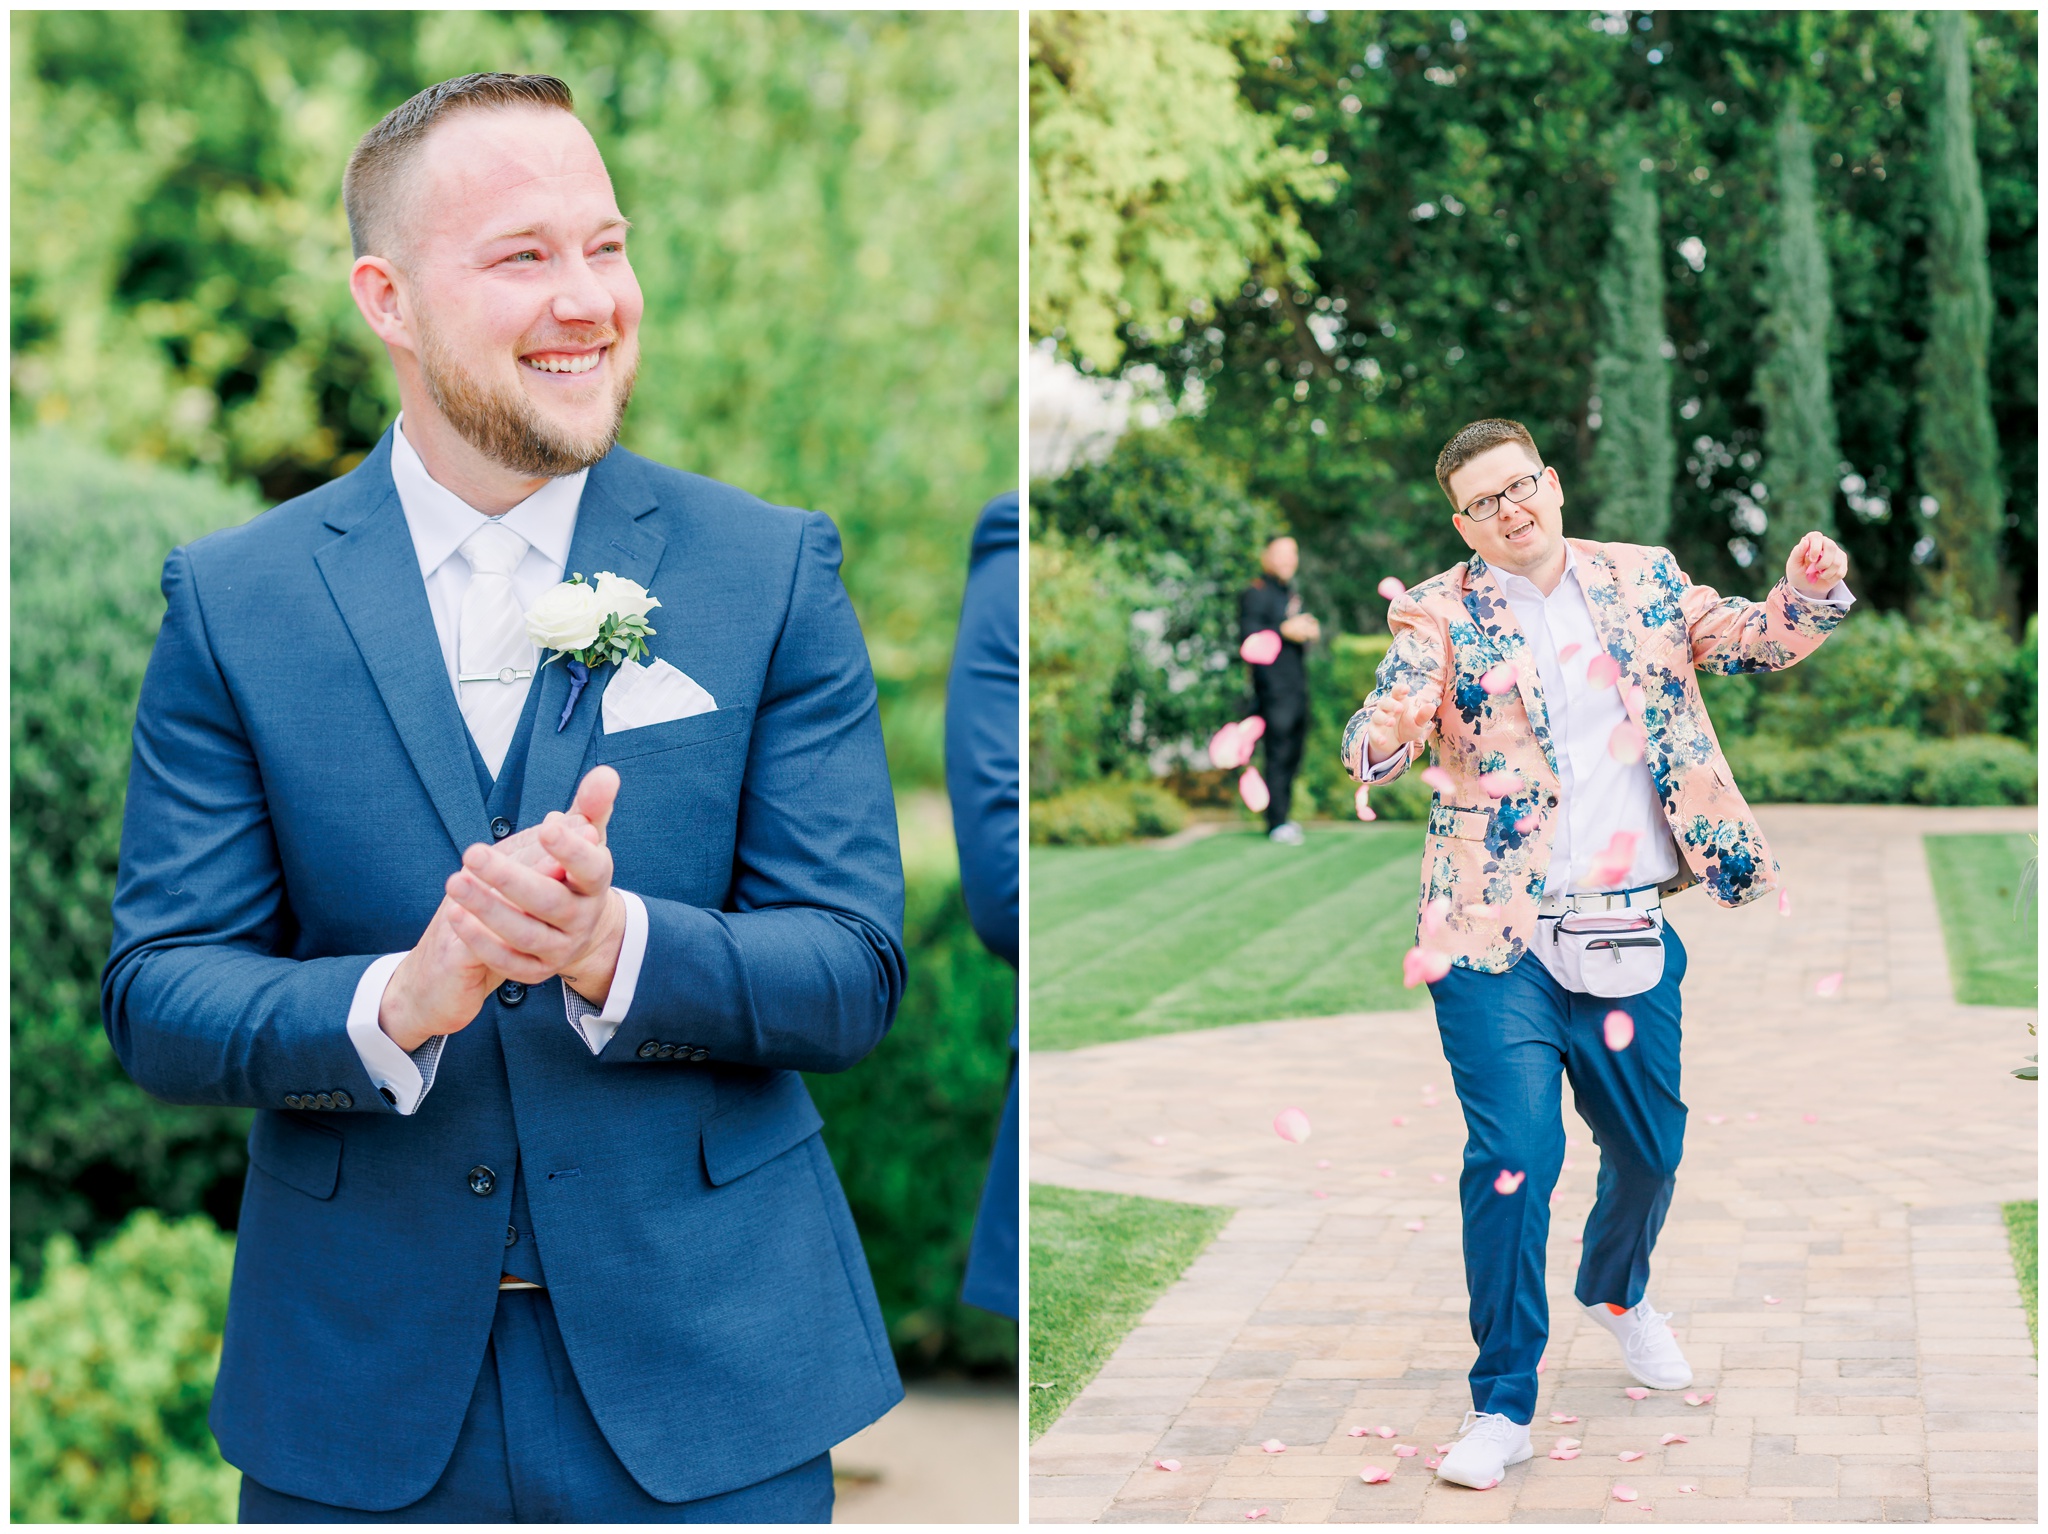 Groom clapping, bridesman tossing flowers down aisle